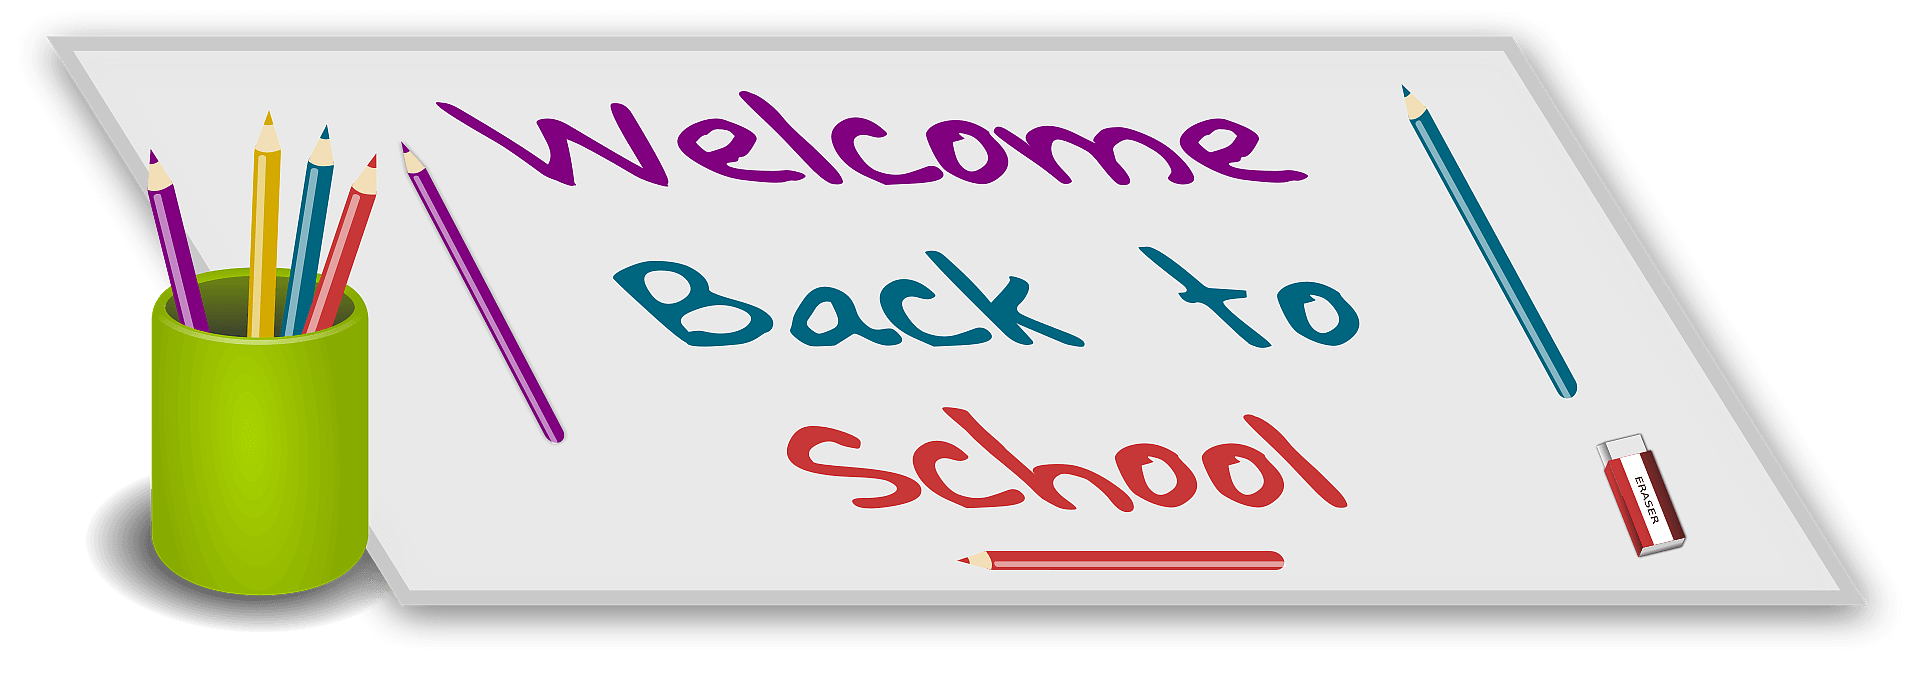 Welcome Back to School clipart transparent